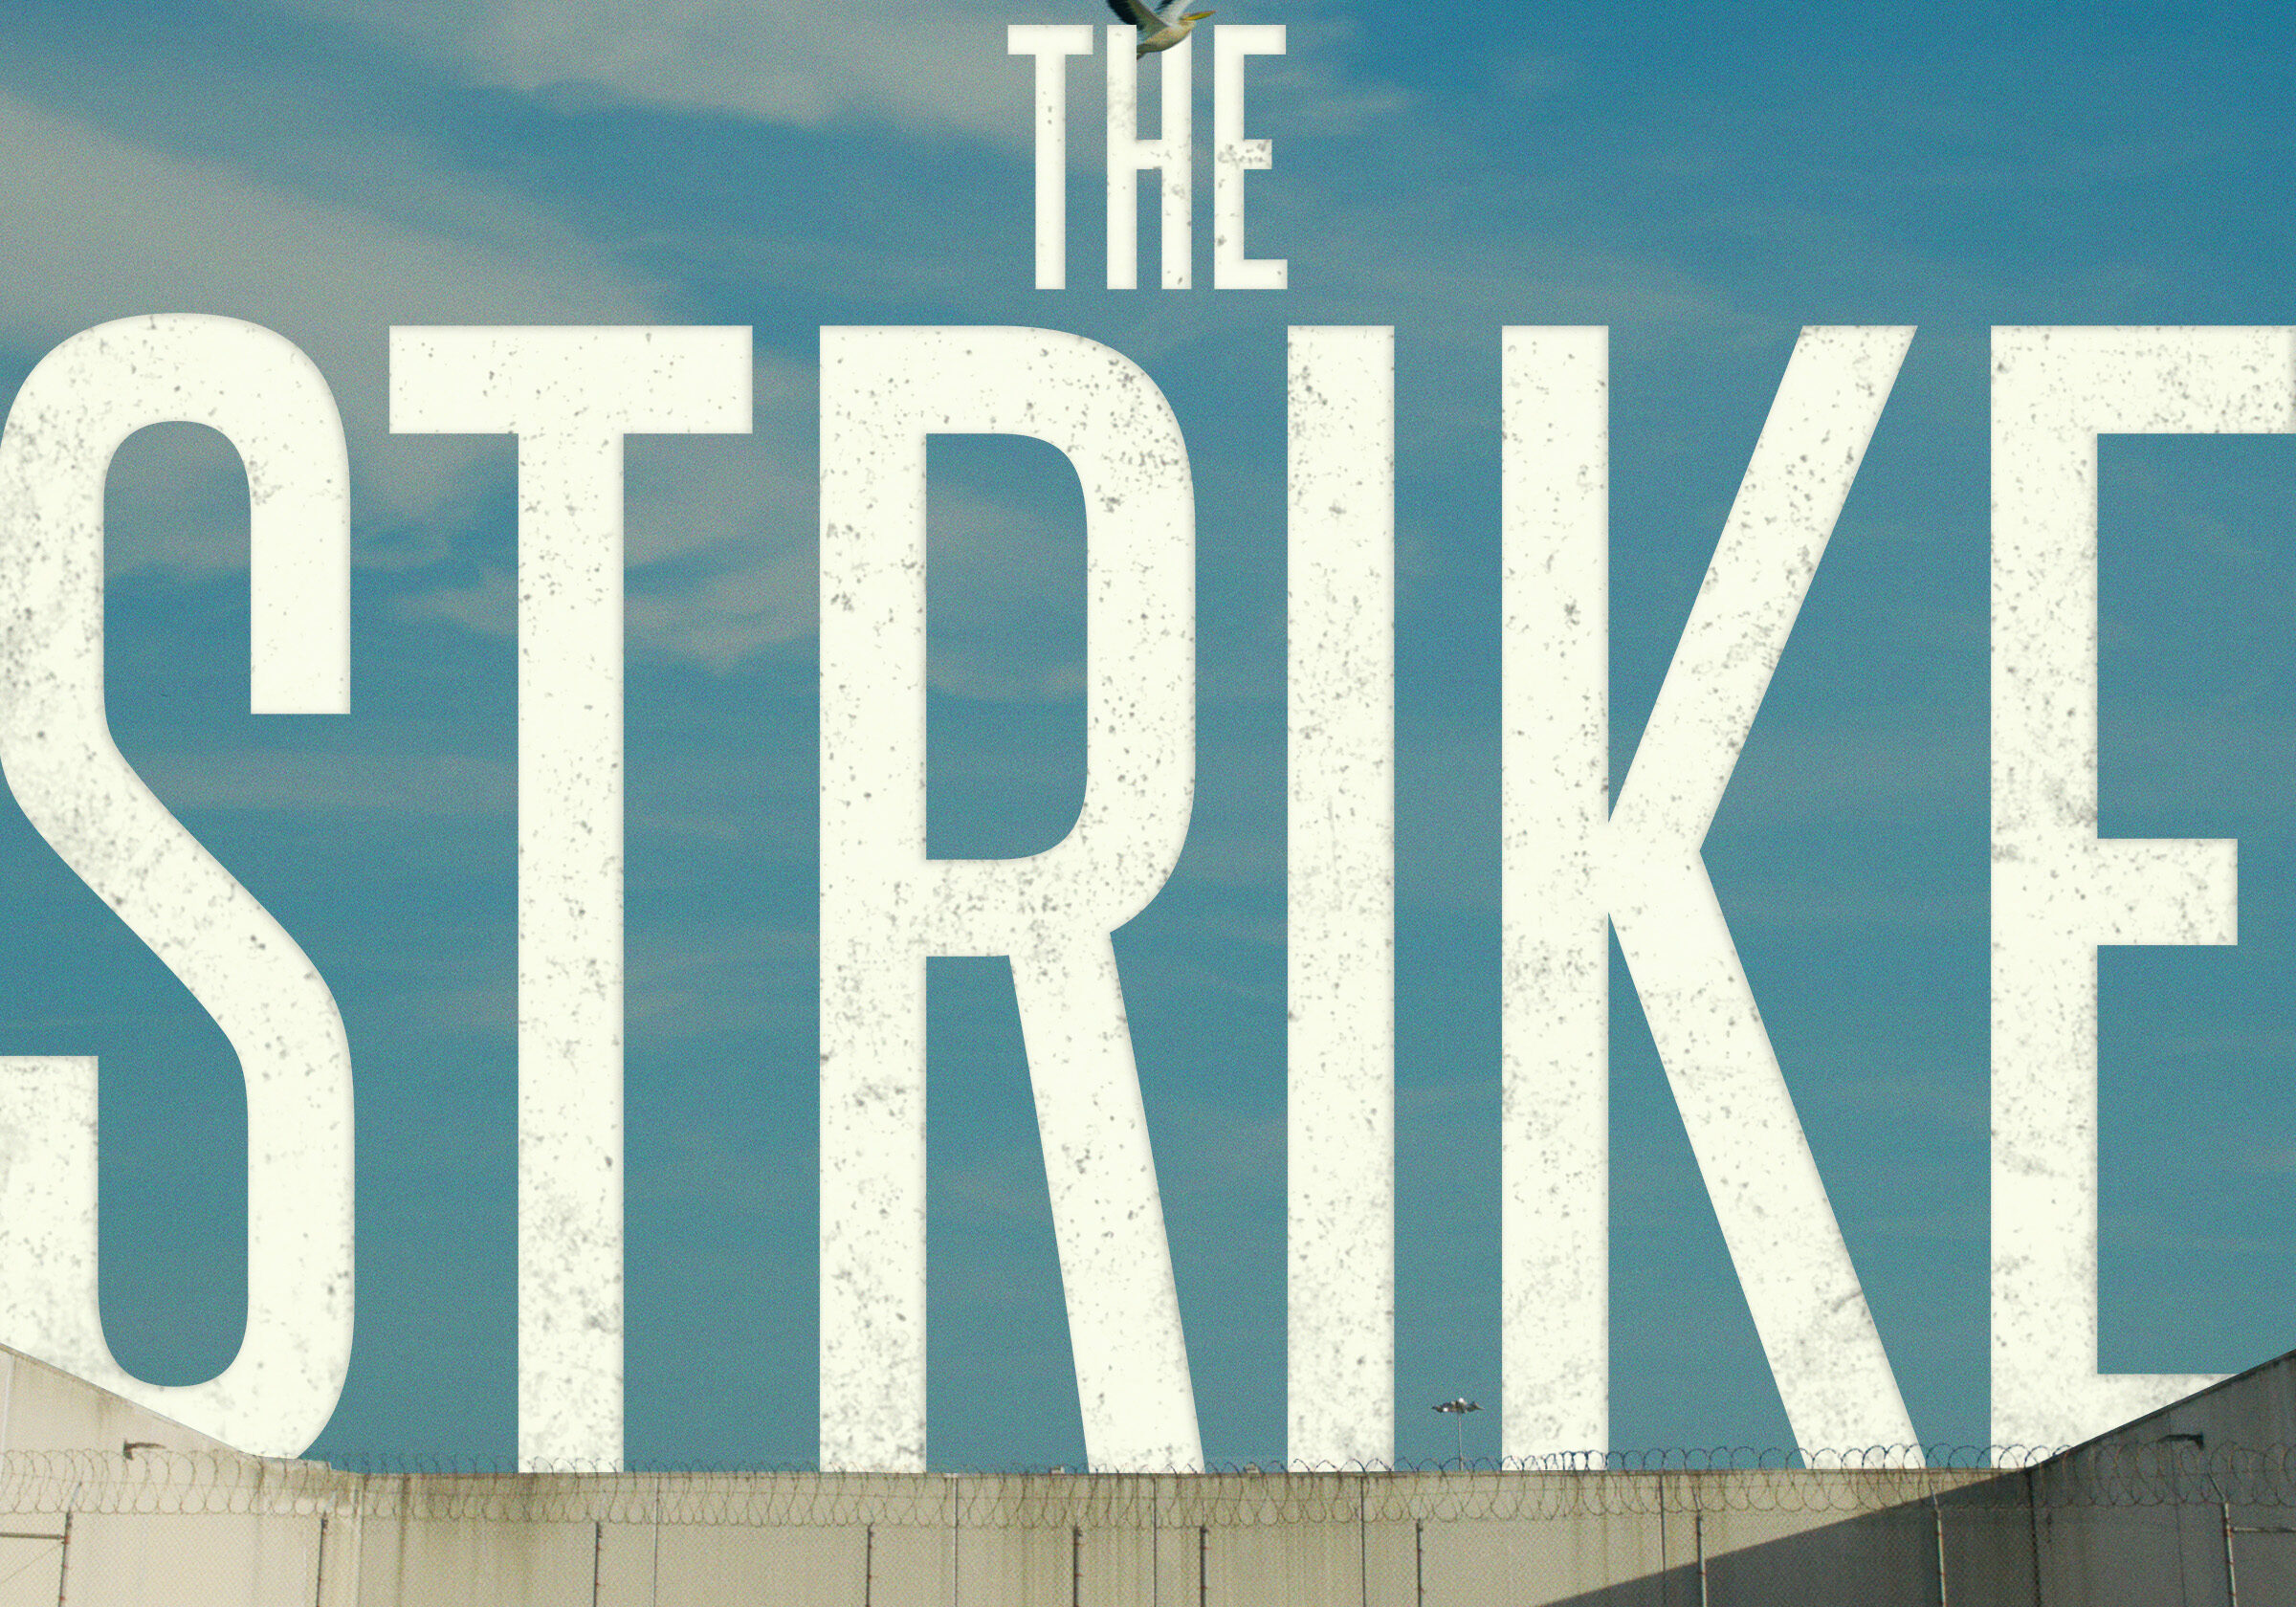 Poster for the documentary "The Strike" with a sky background and tall white letters.